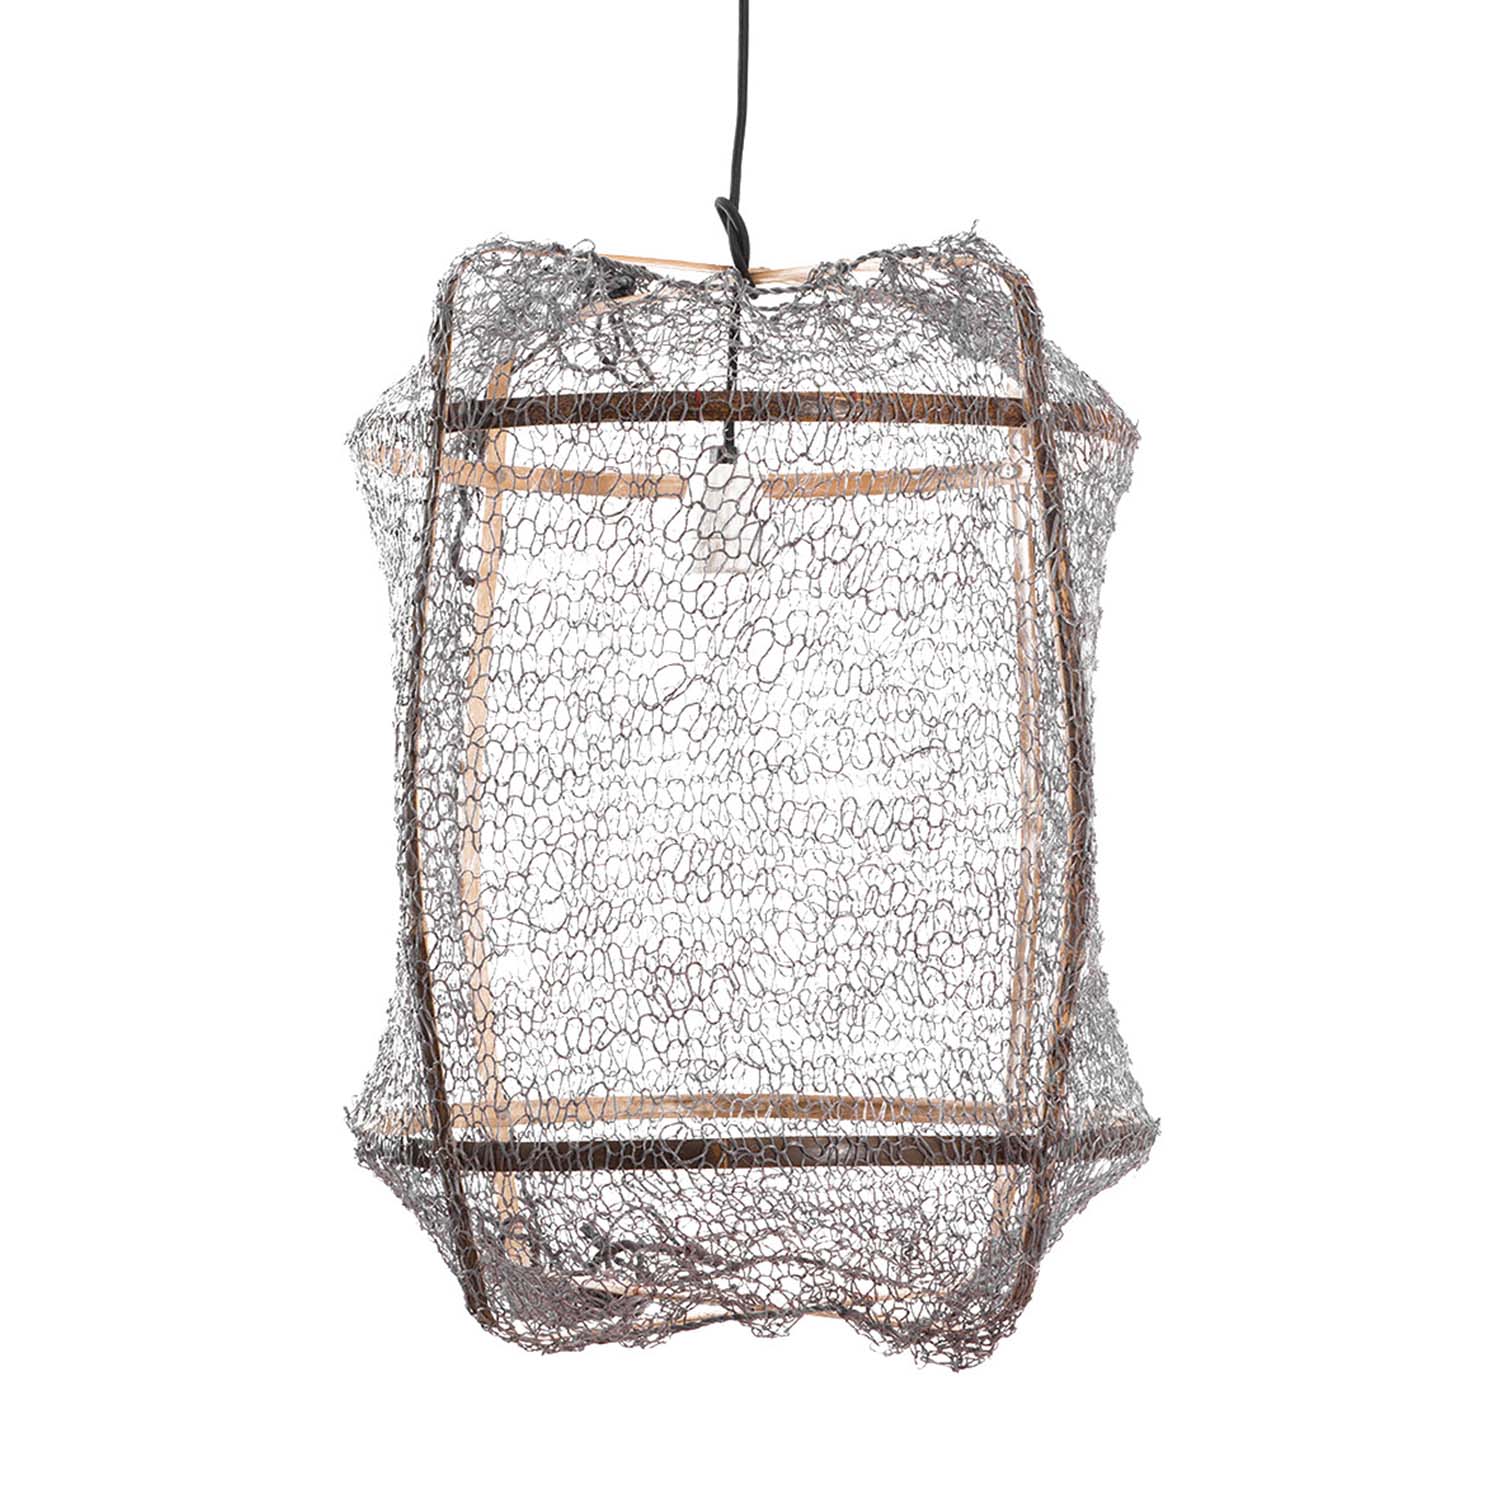 Z5 - Cage pendant light in black bamboo and white, beige, gray or black fabric